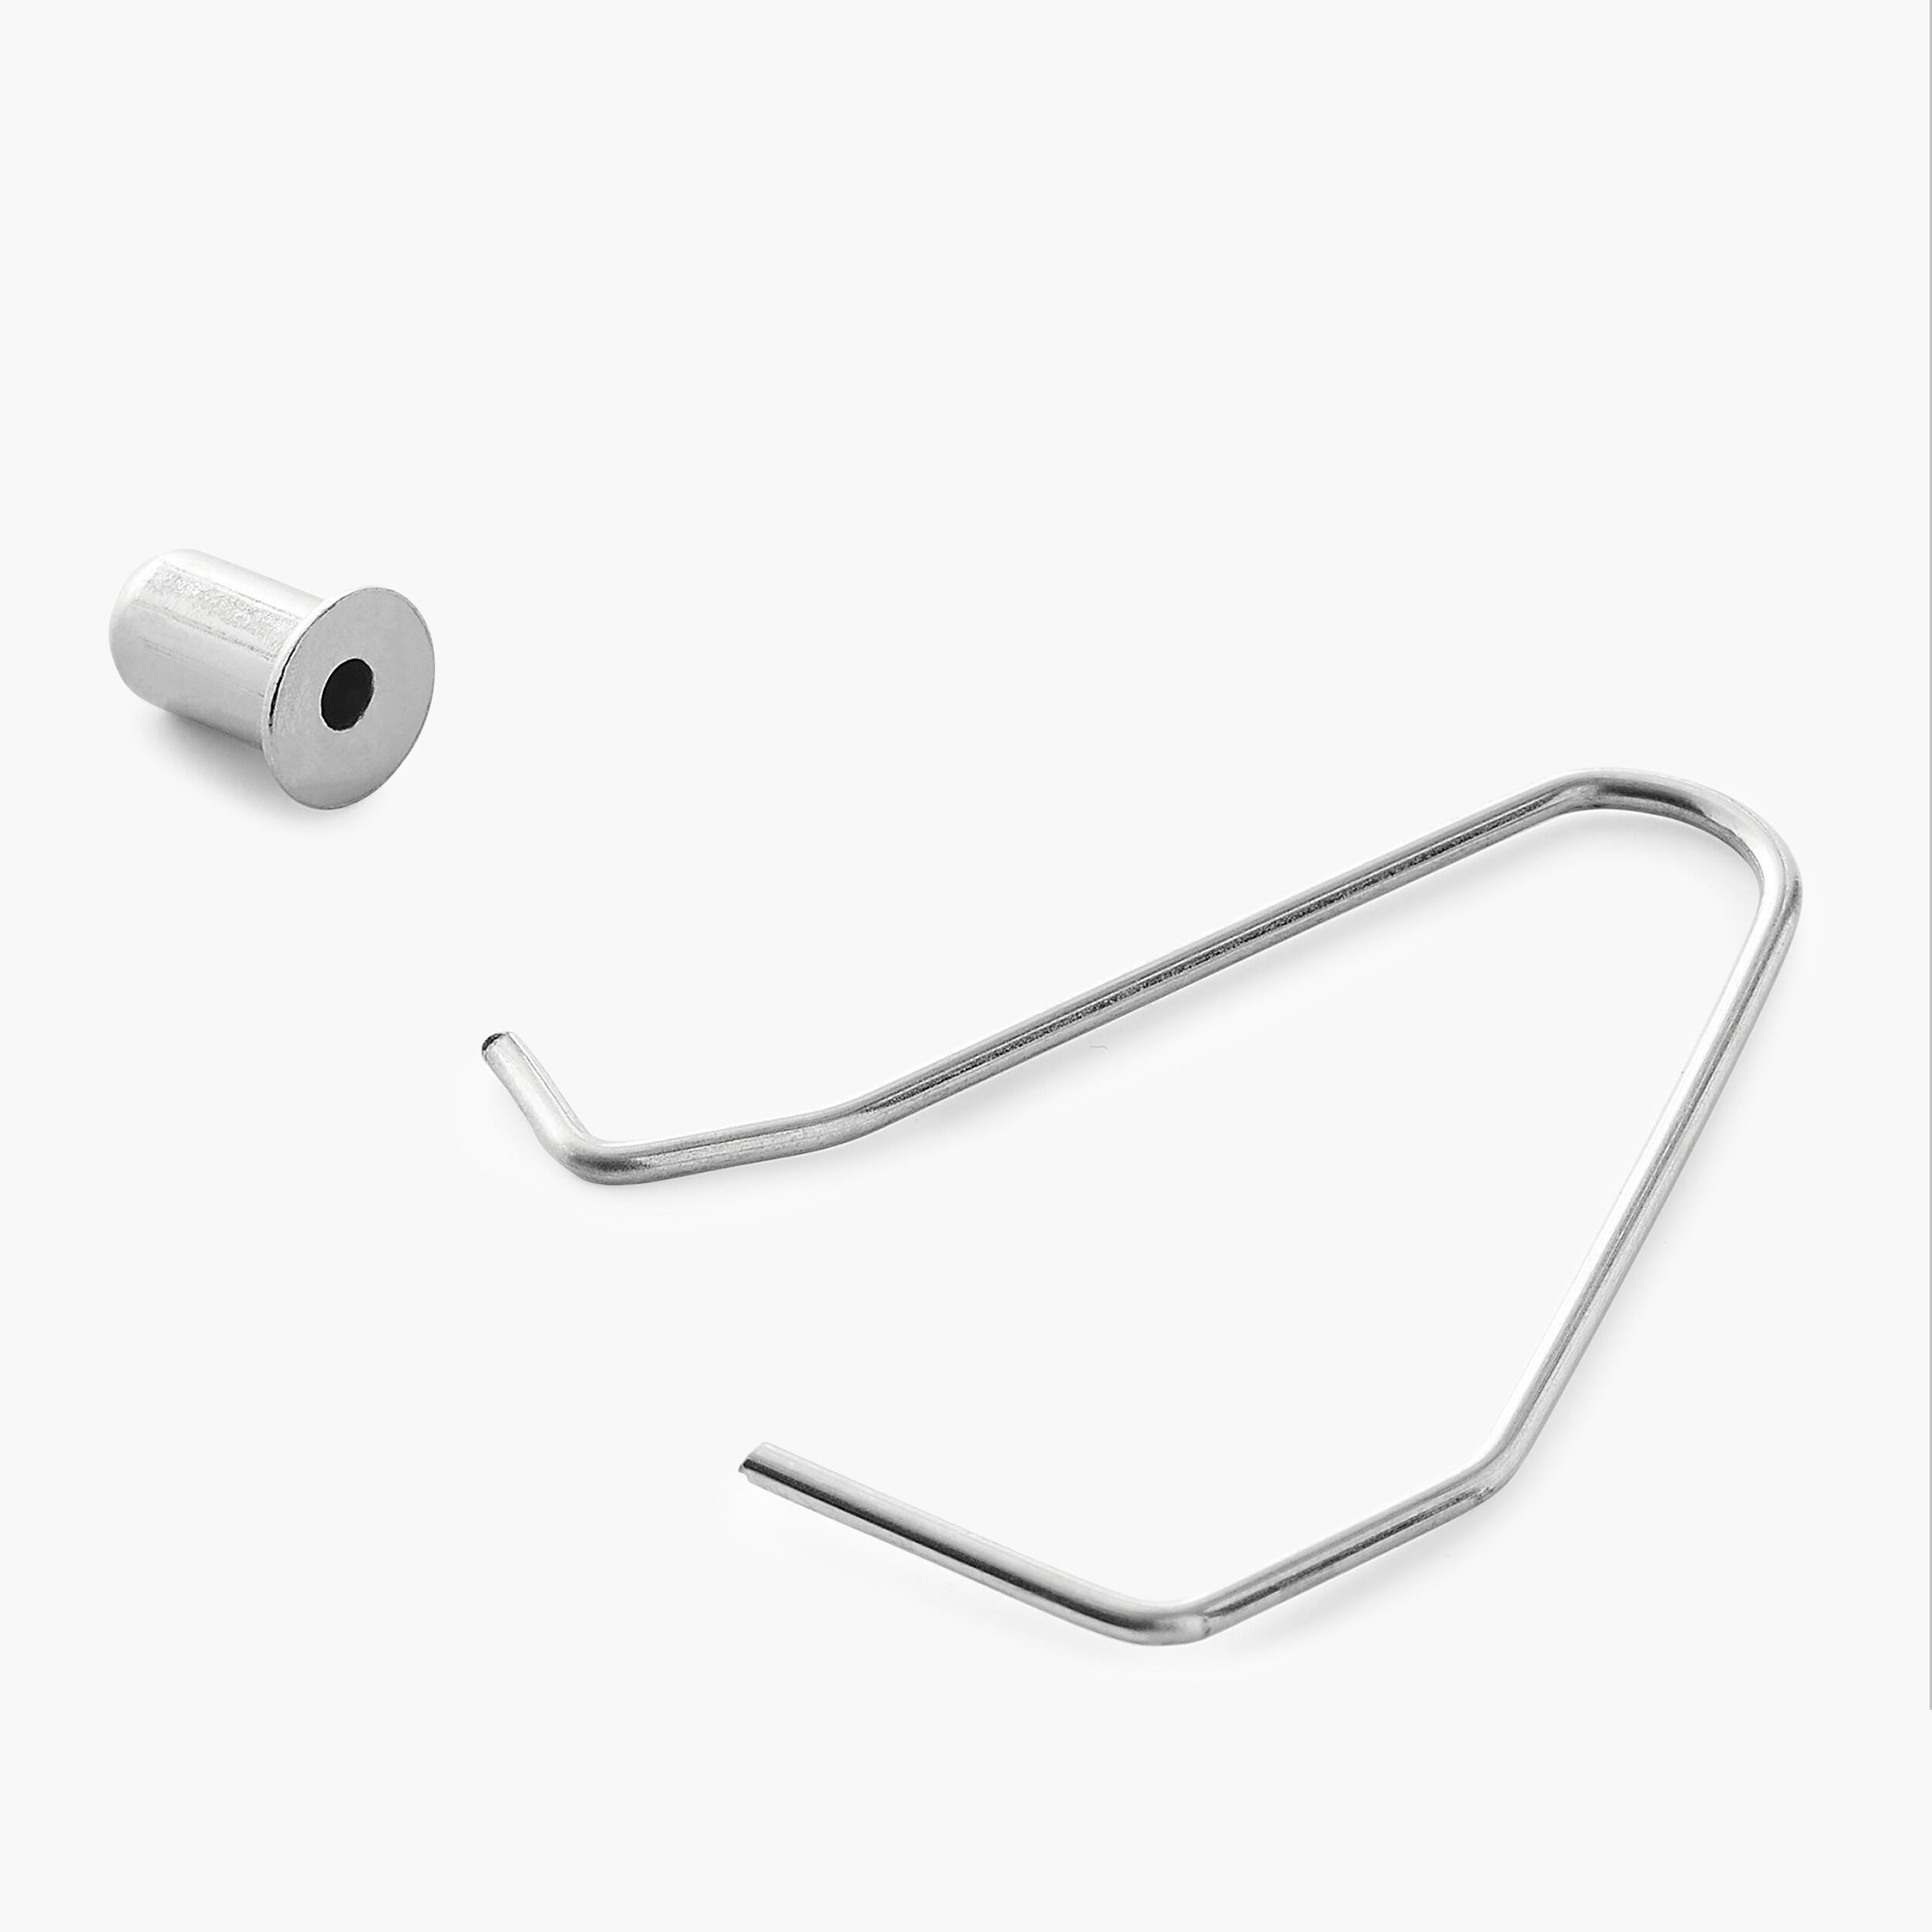 Push-Pin Kit for Play 3 / Play 5 Scooters Purchased after 2020 1/1